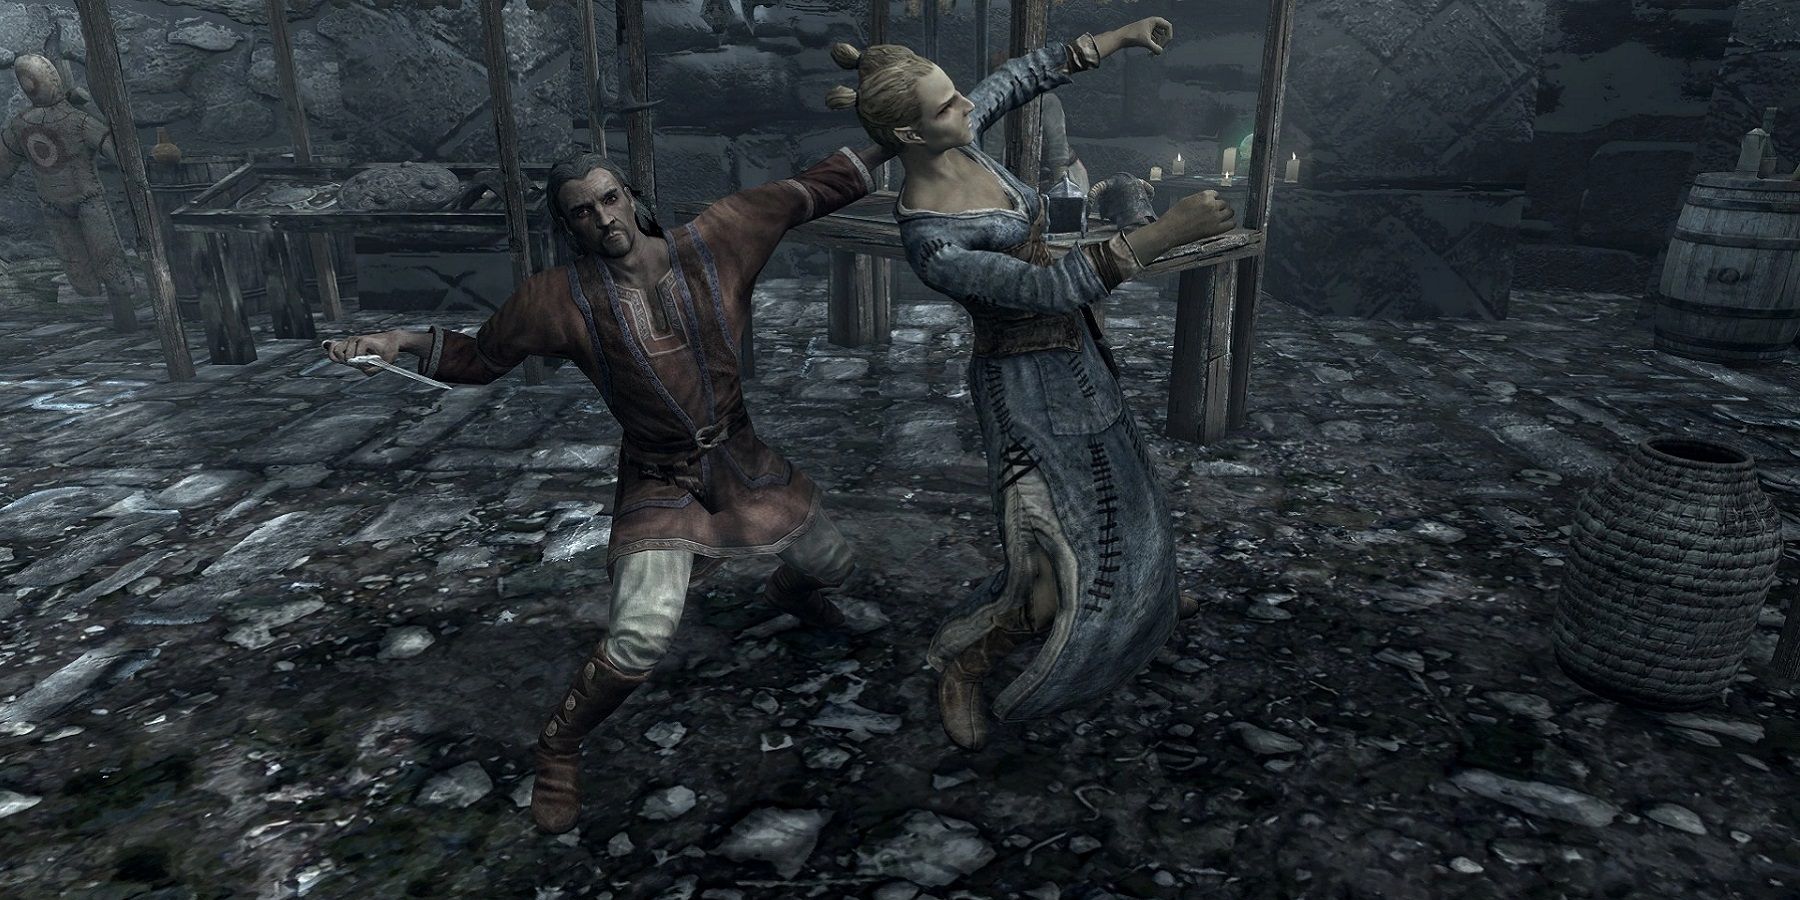 Image from Skyrim showing one NPC about to stab another.